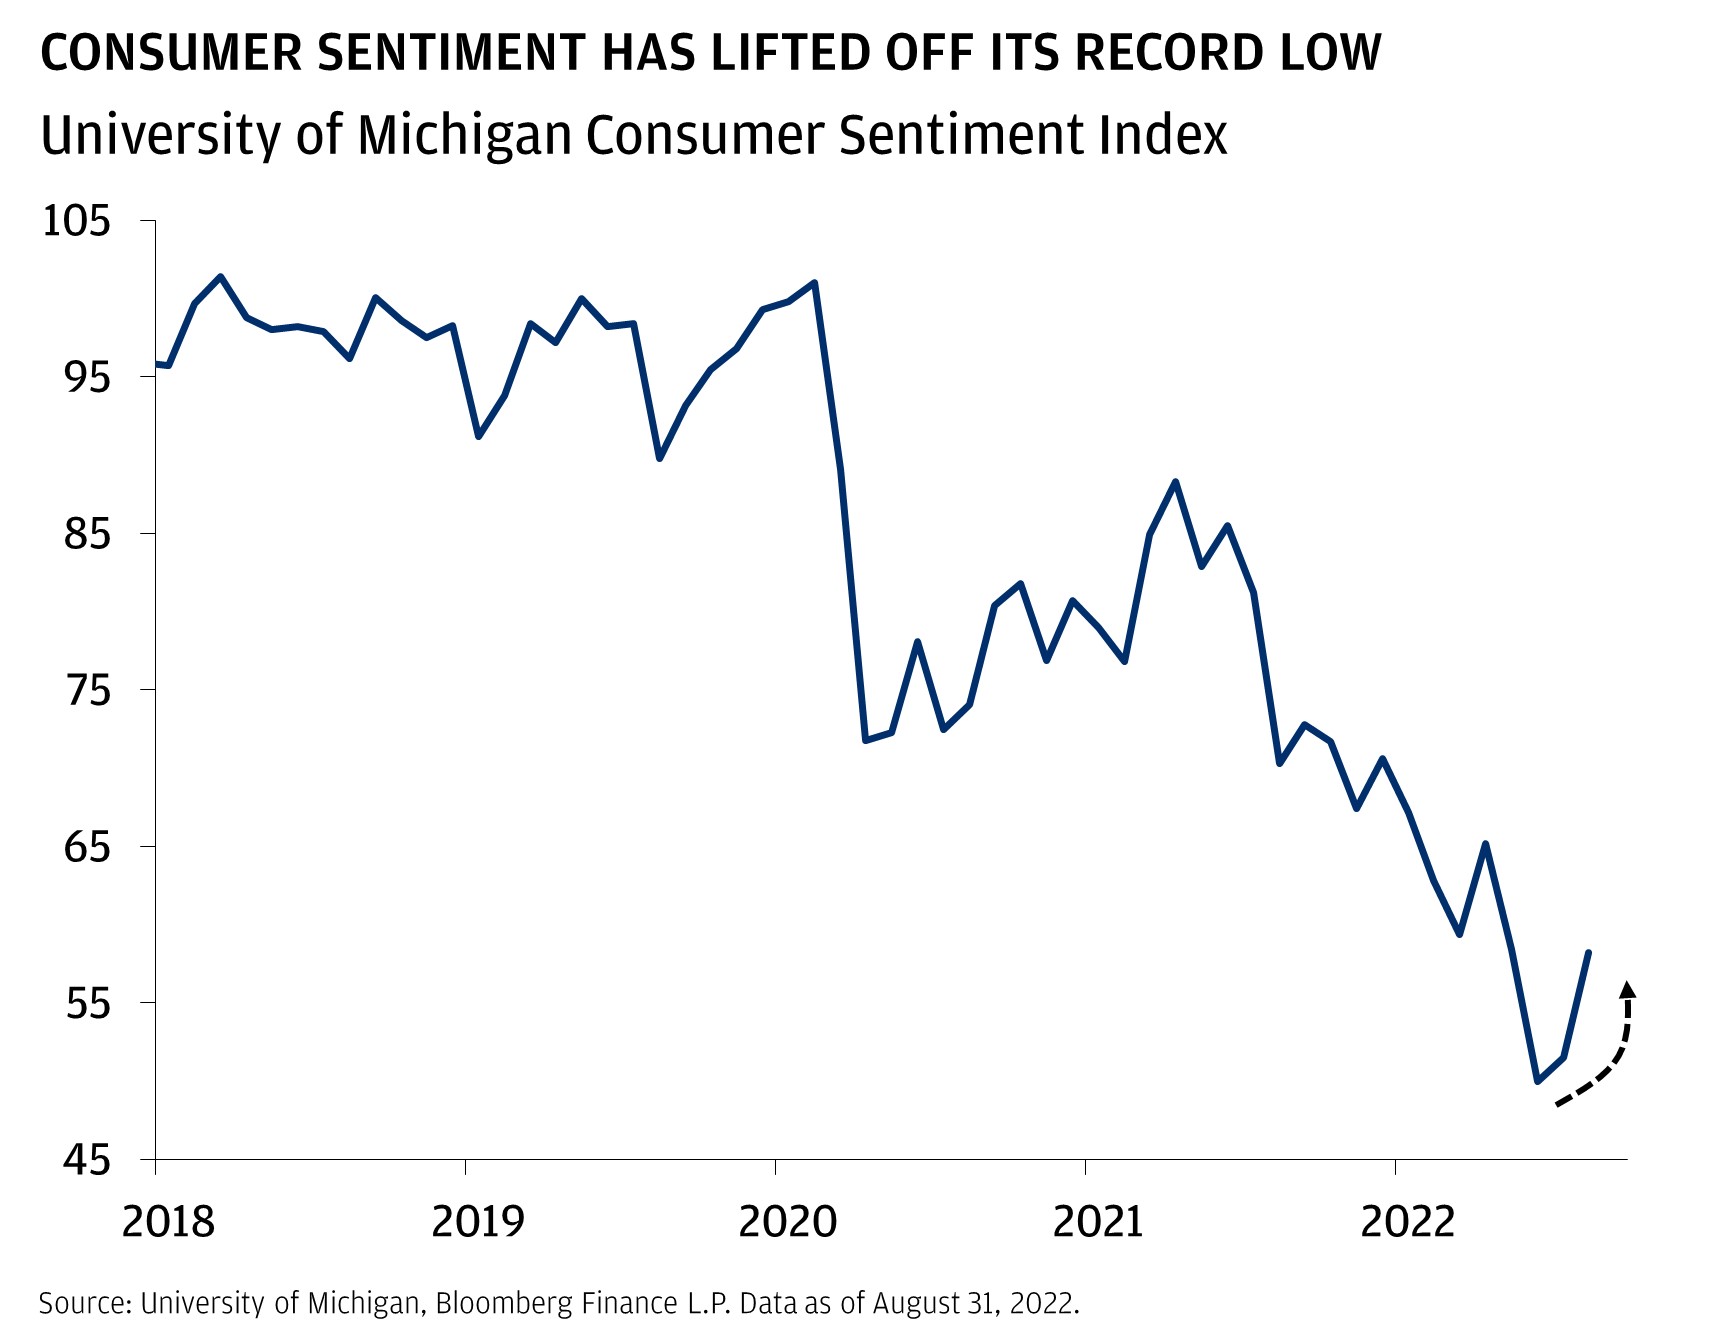 This chart shows the University of Michigan Consumer Sentiment Index from the start of 2018 through August 2022. 